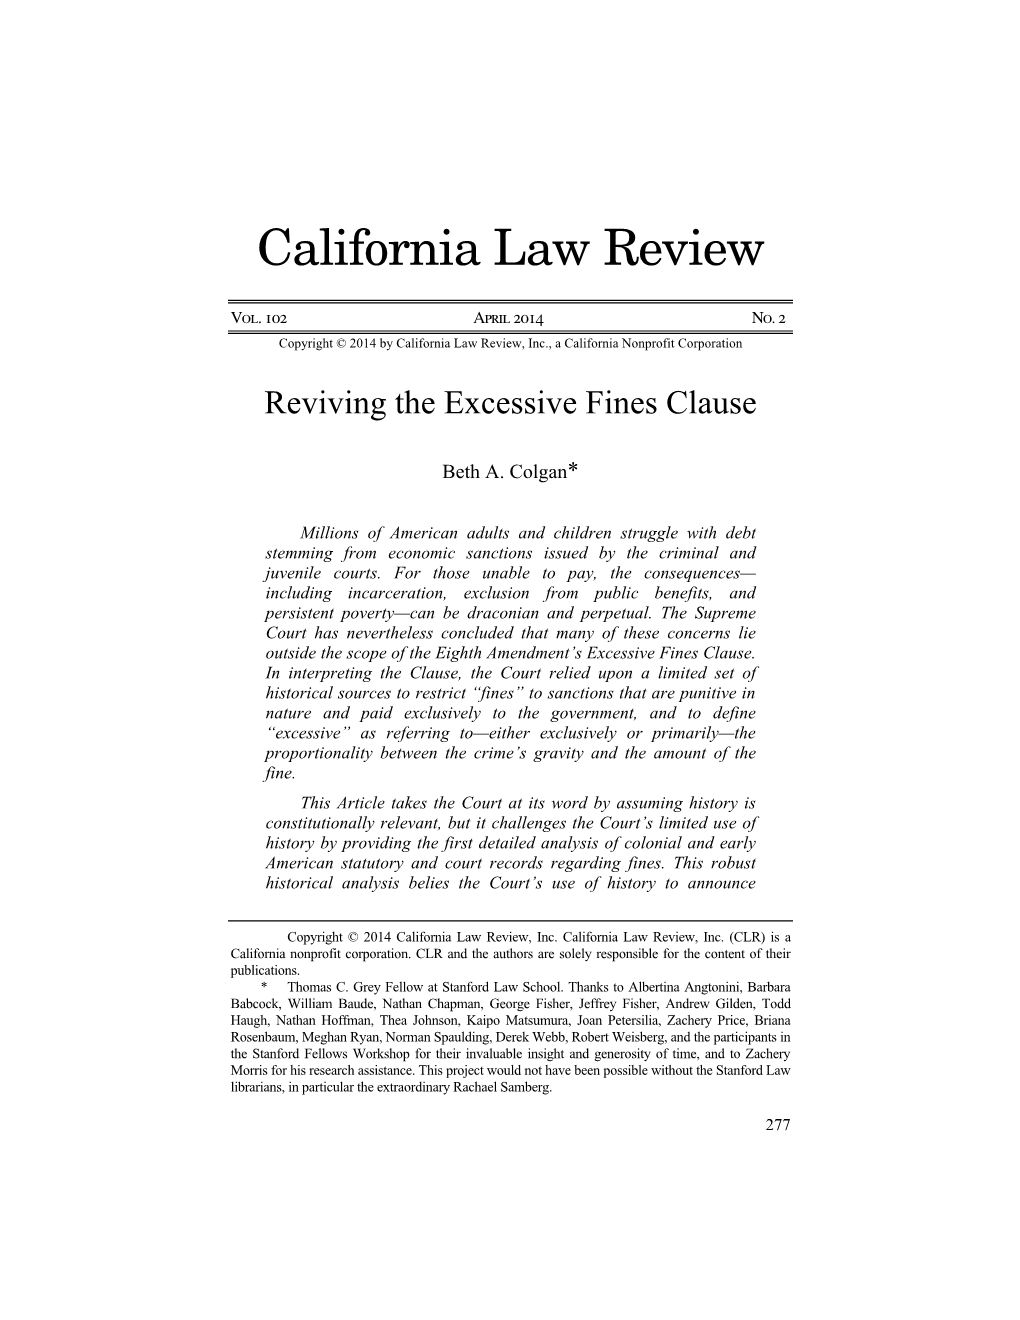 Reviving the Excessive Fines Clause